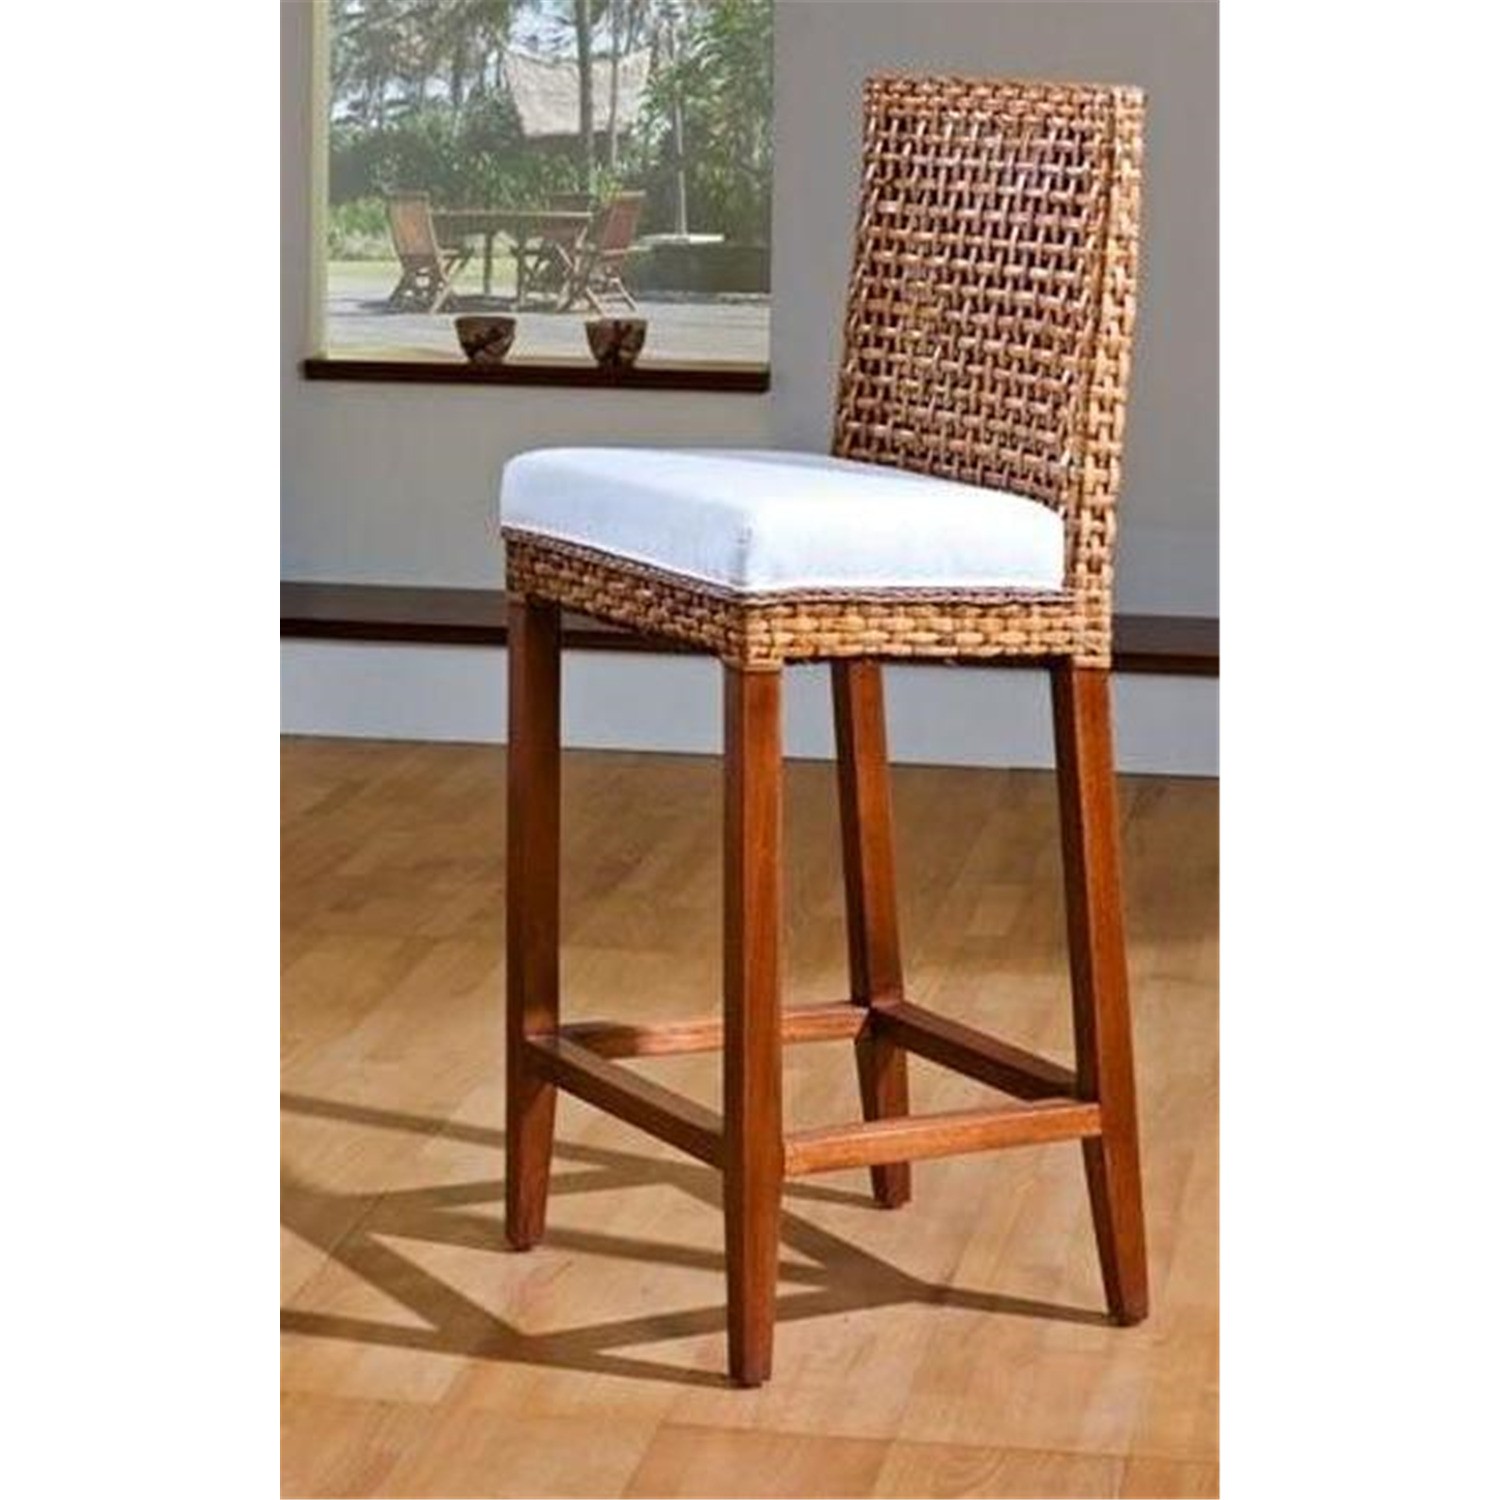 Cancun Palm Indoor Swivel Rattan 24" Counter Stool in TC Antique Finish Fabric: Patriot Blueberry